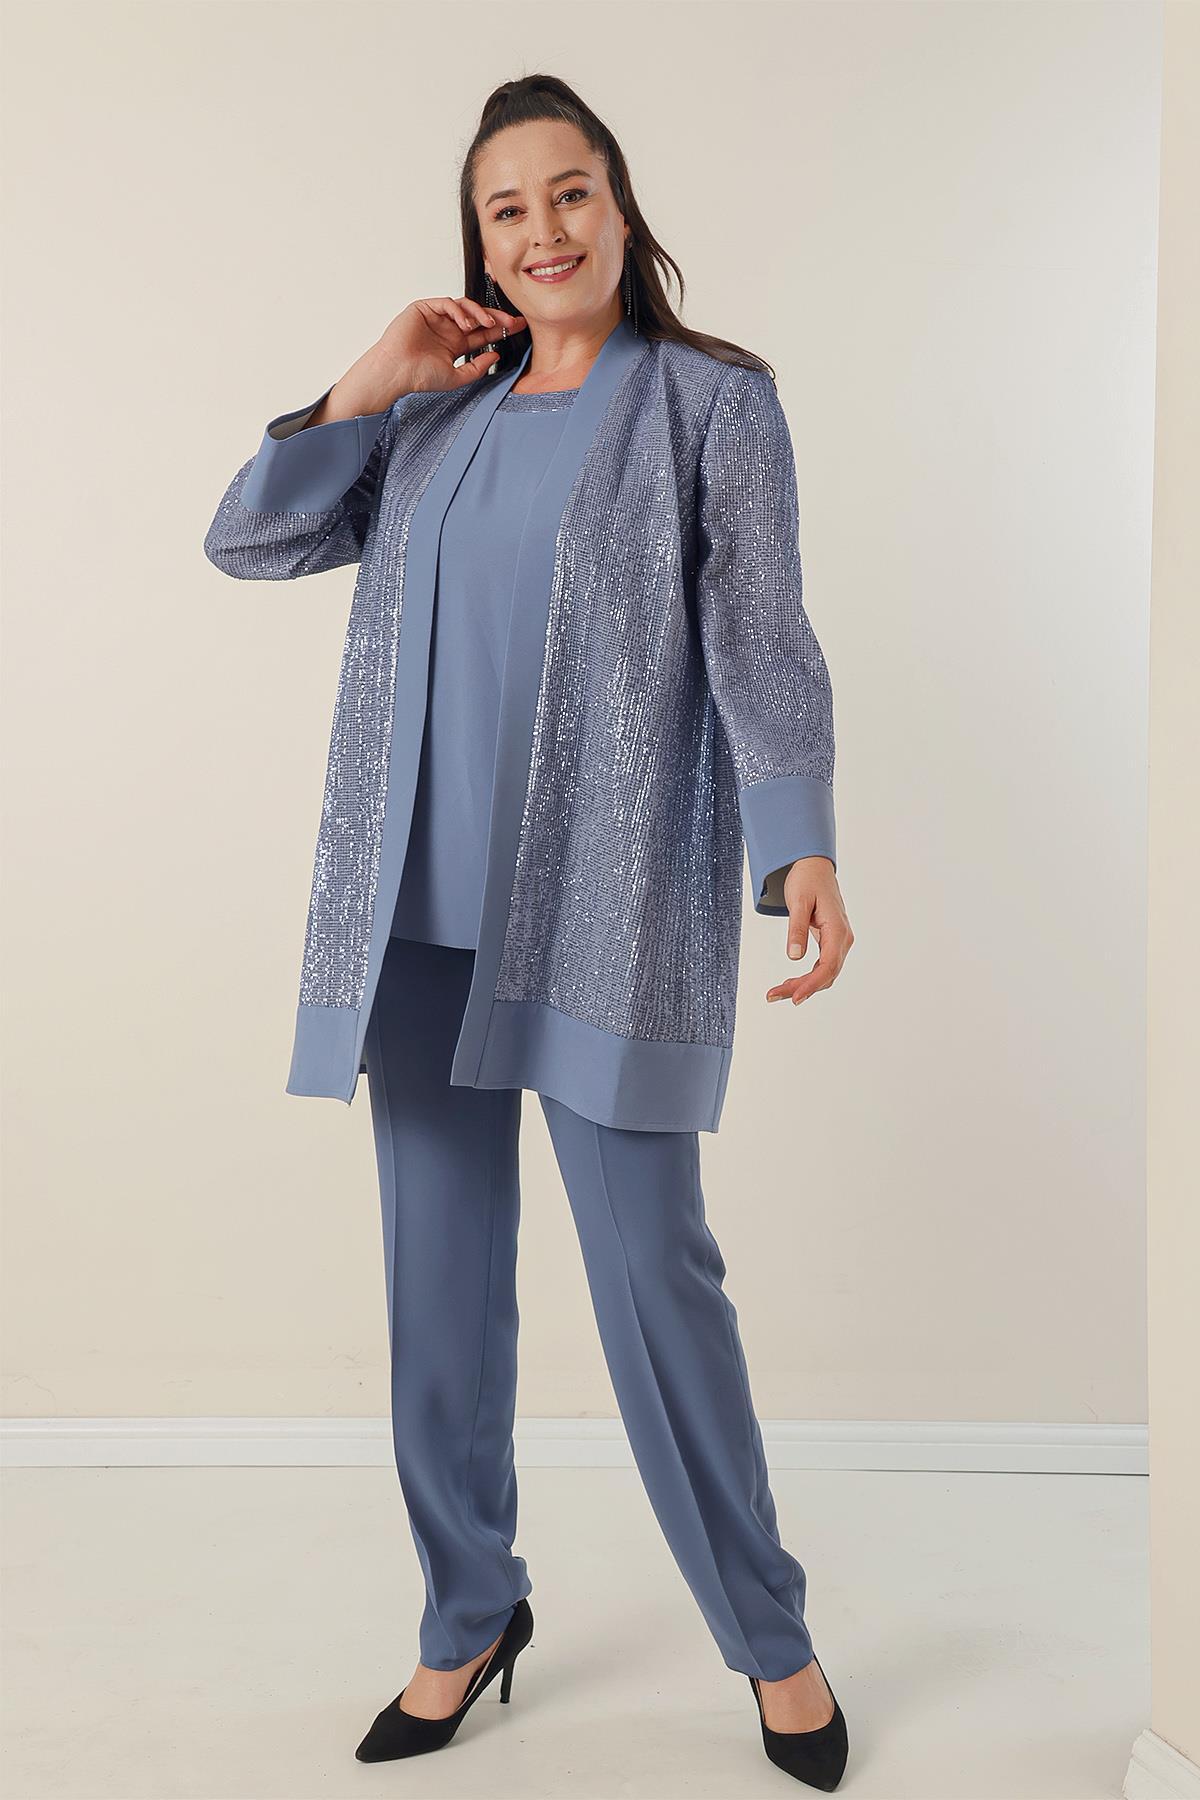 Levně By Saygı Plus Size 3-piece Set with A Jacket, Blouse and Pants with sequin Detail.